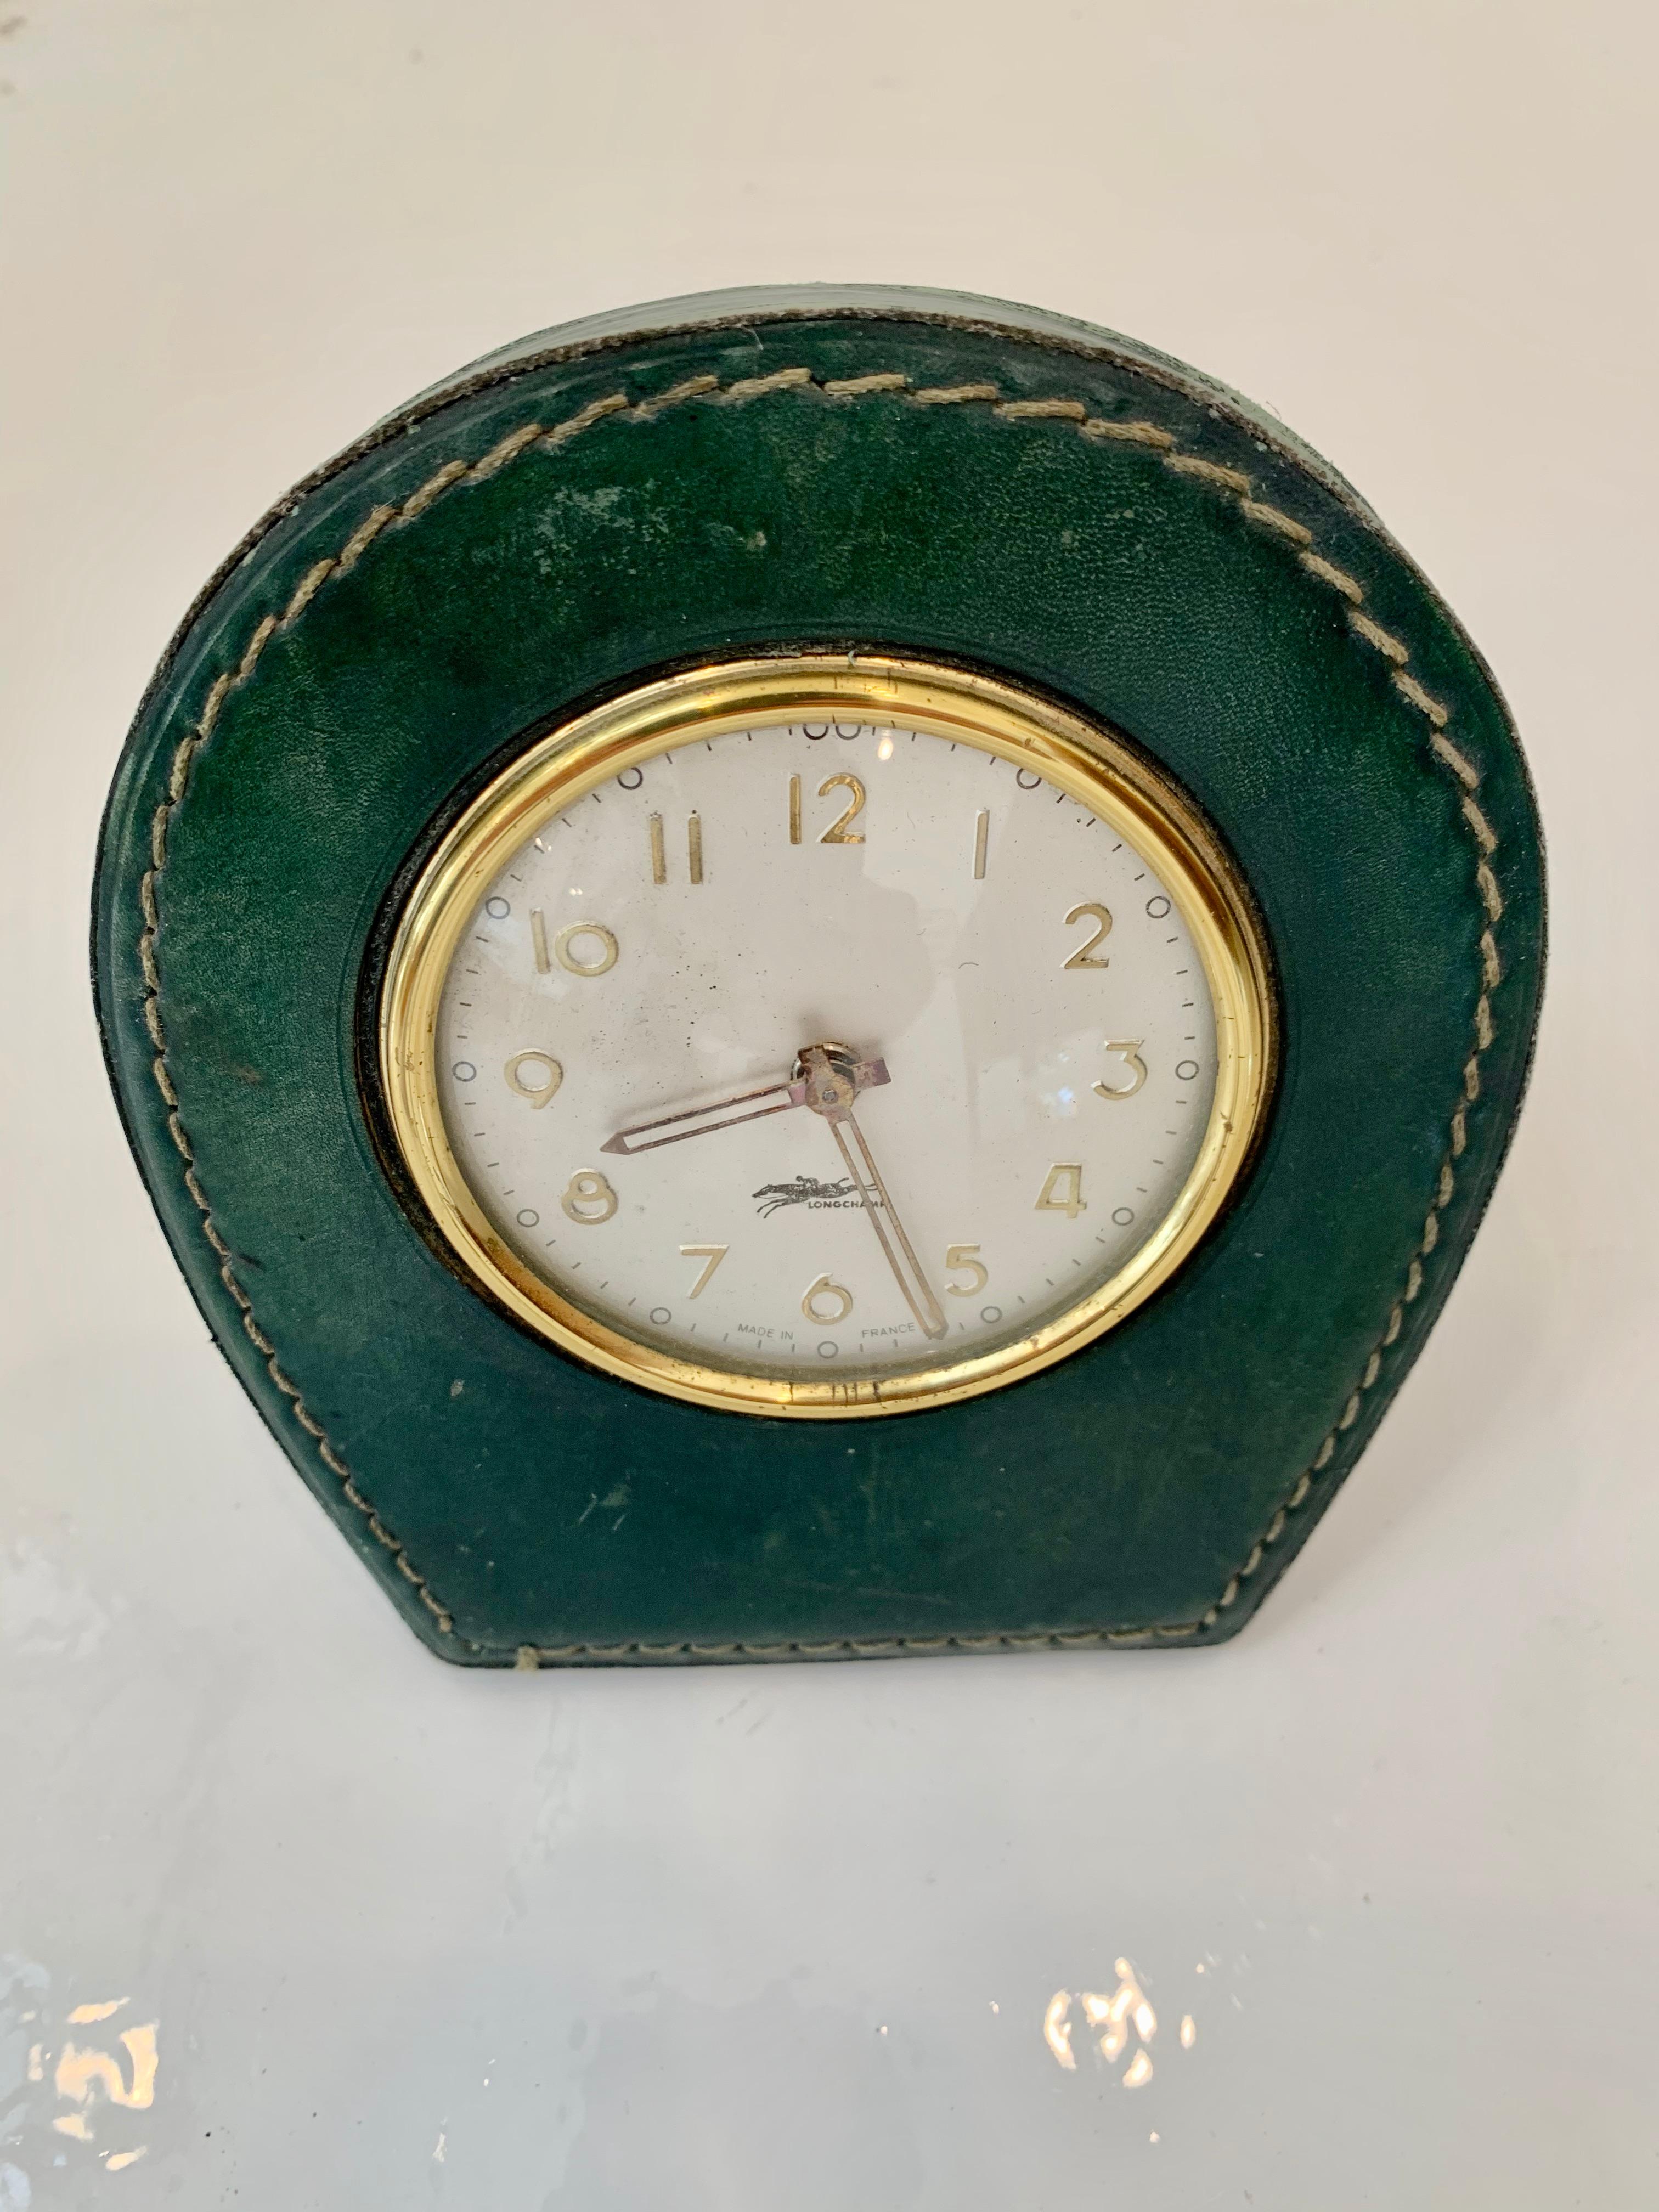 Handsome French leather desk clock by Longchamp. Great vintage condition. Keeps good time. Excellent patina to green leather. Great vintage condition.